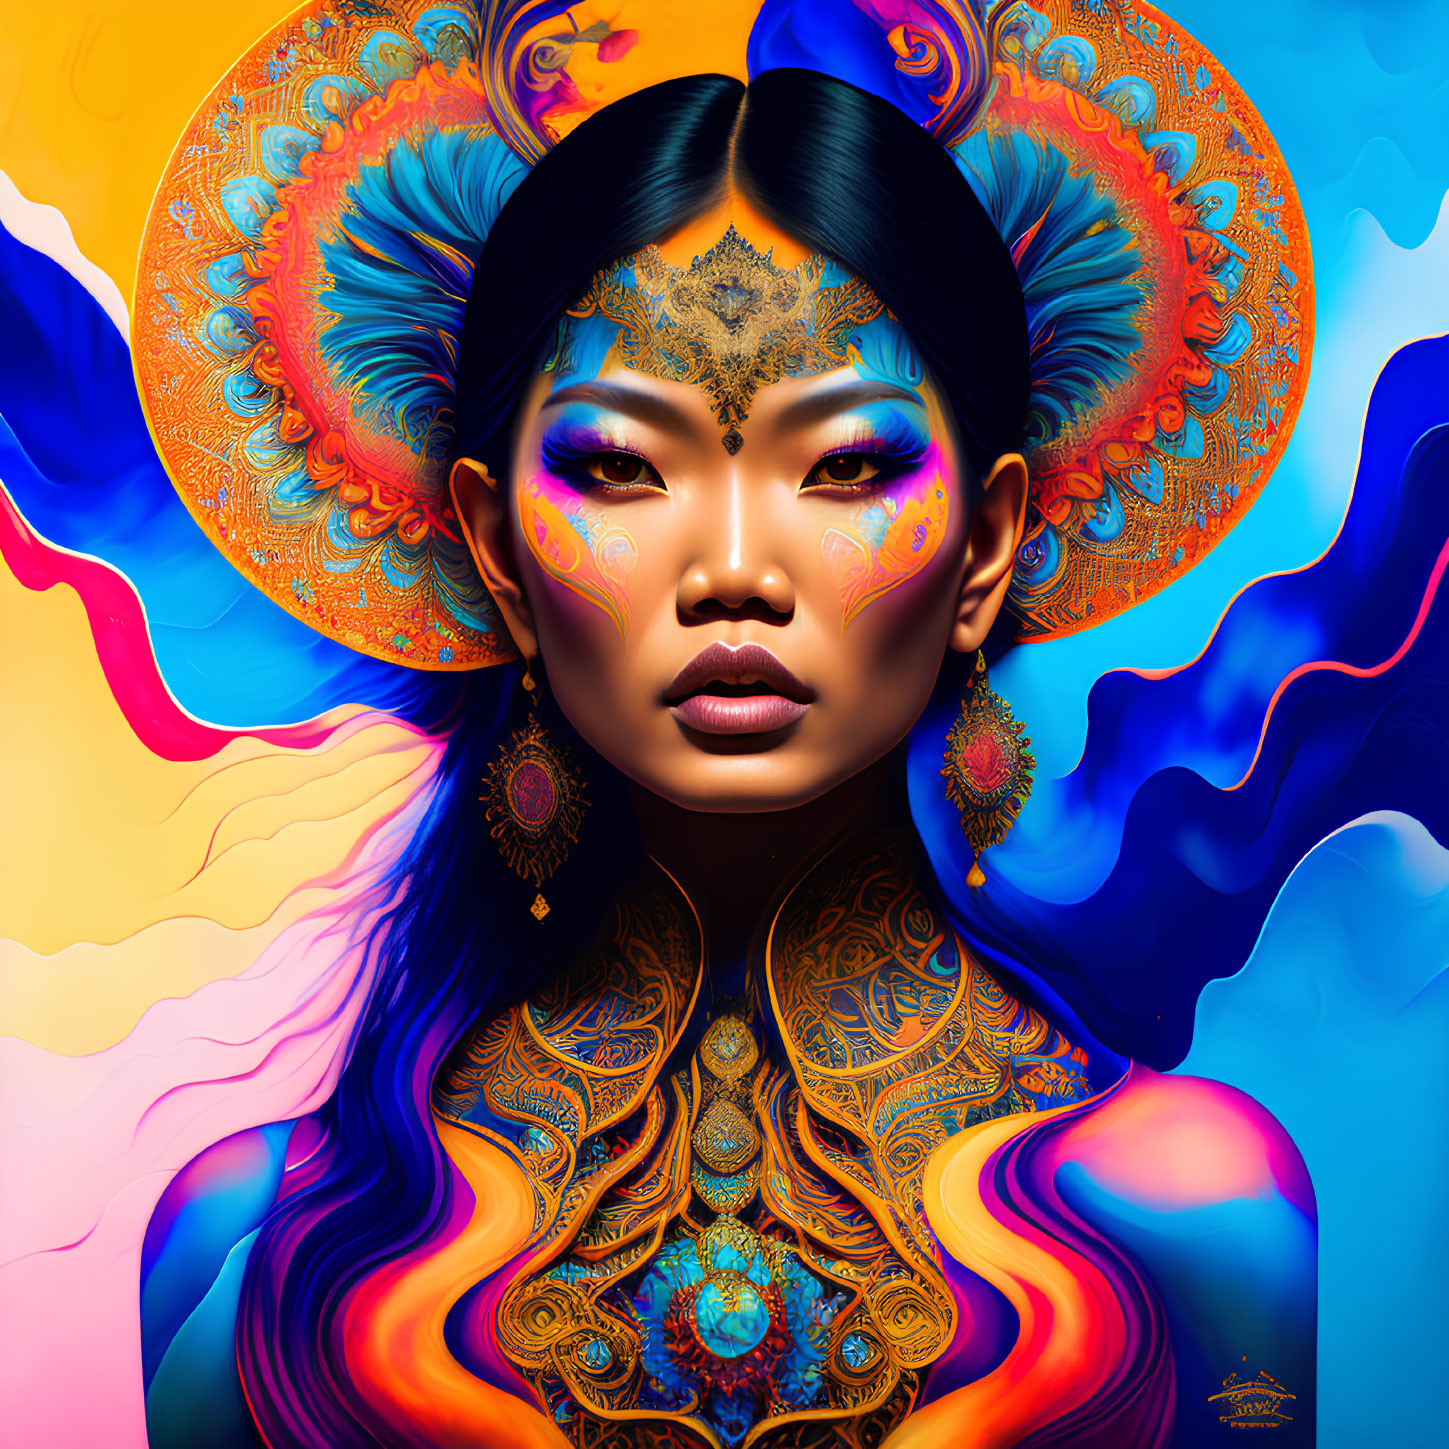 Colorful digital portrait of a woman with blue and orange makeup and ornate accessories